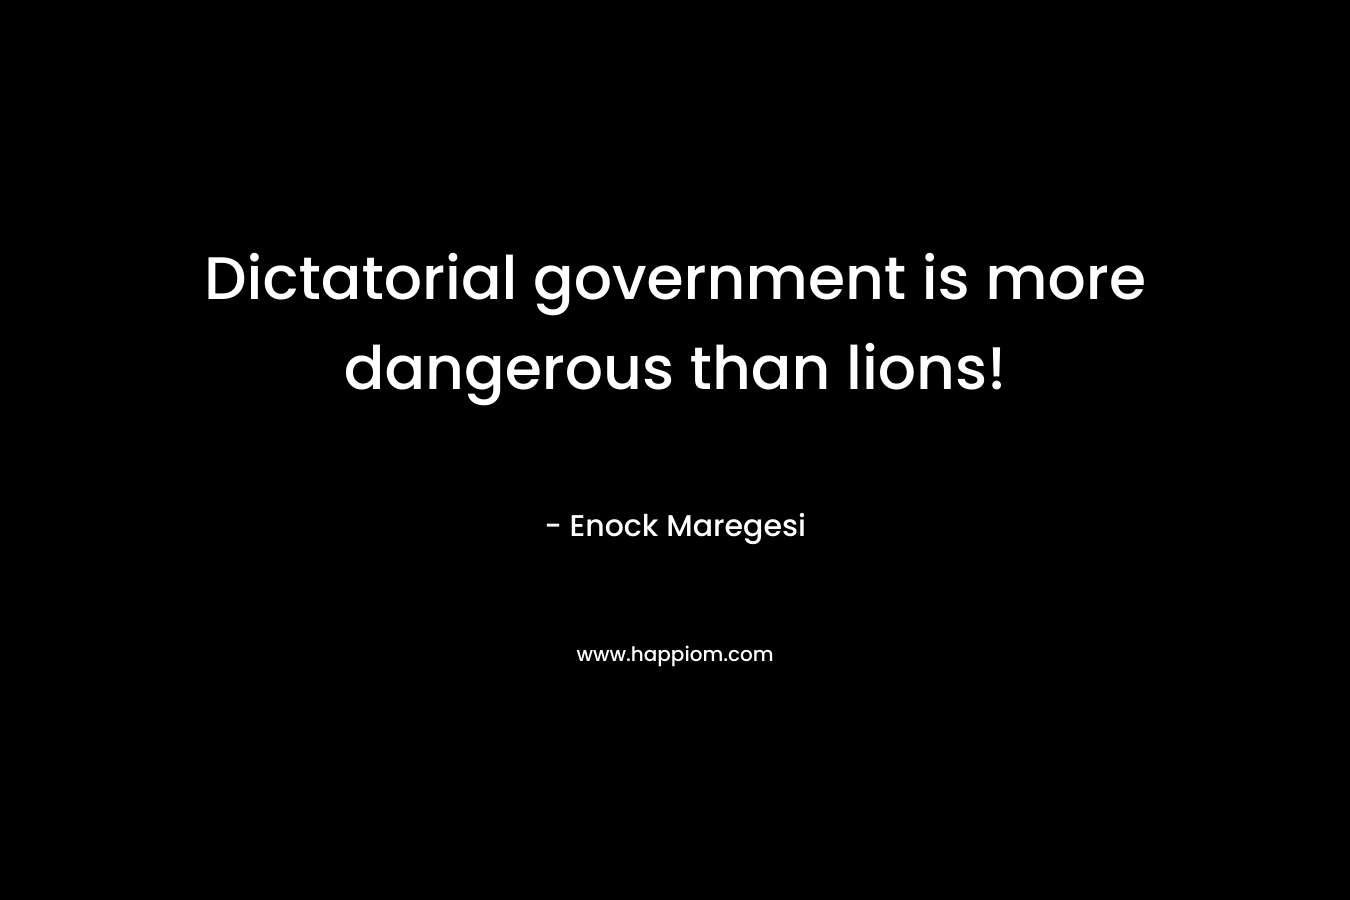 Dictatorial government is more dangerous than lions! – Enock Maregesi